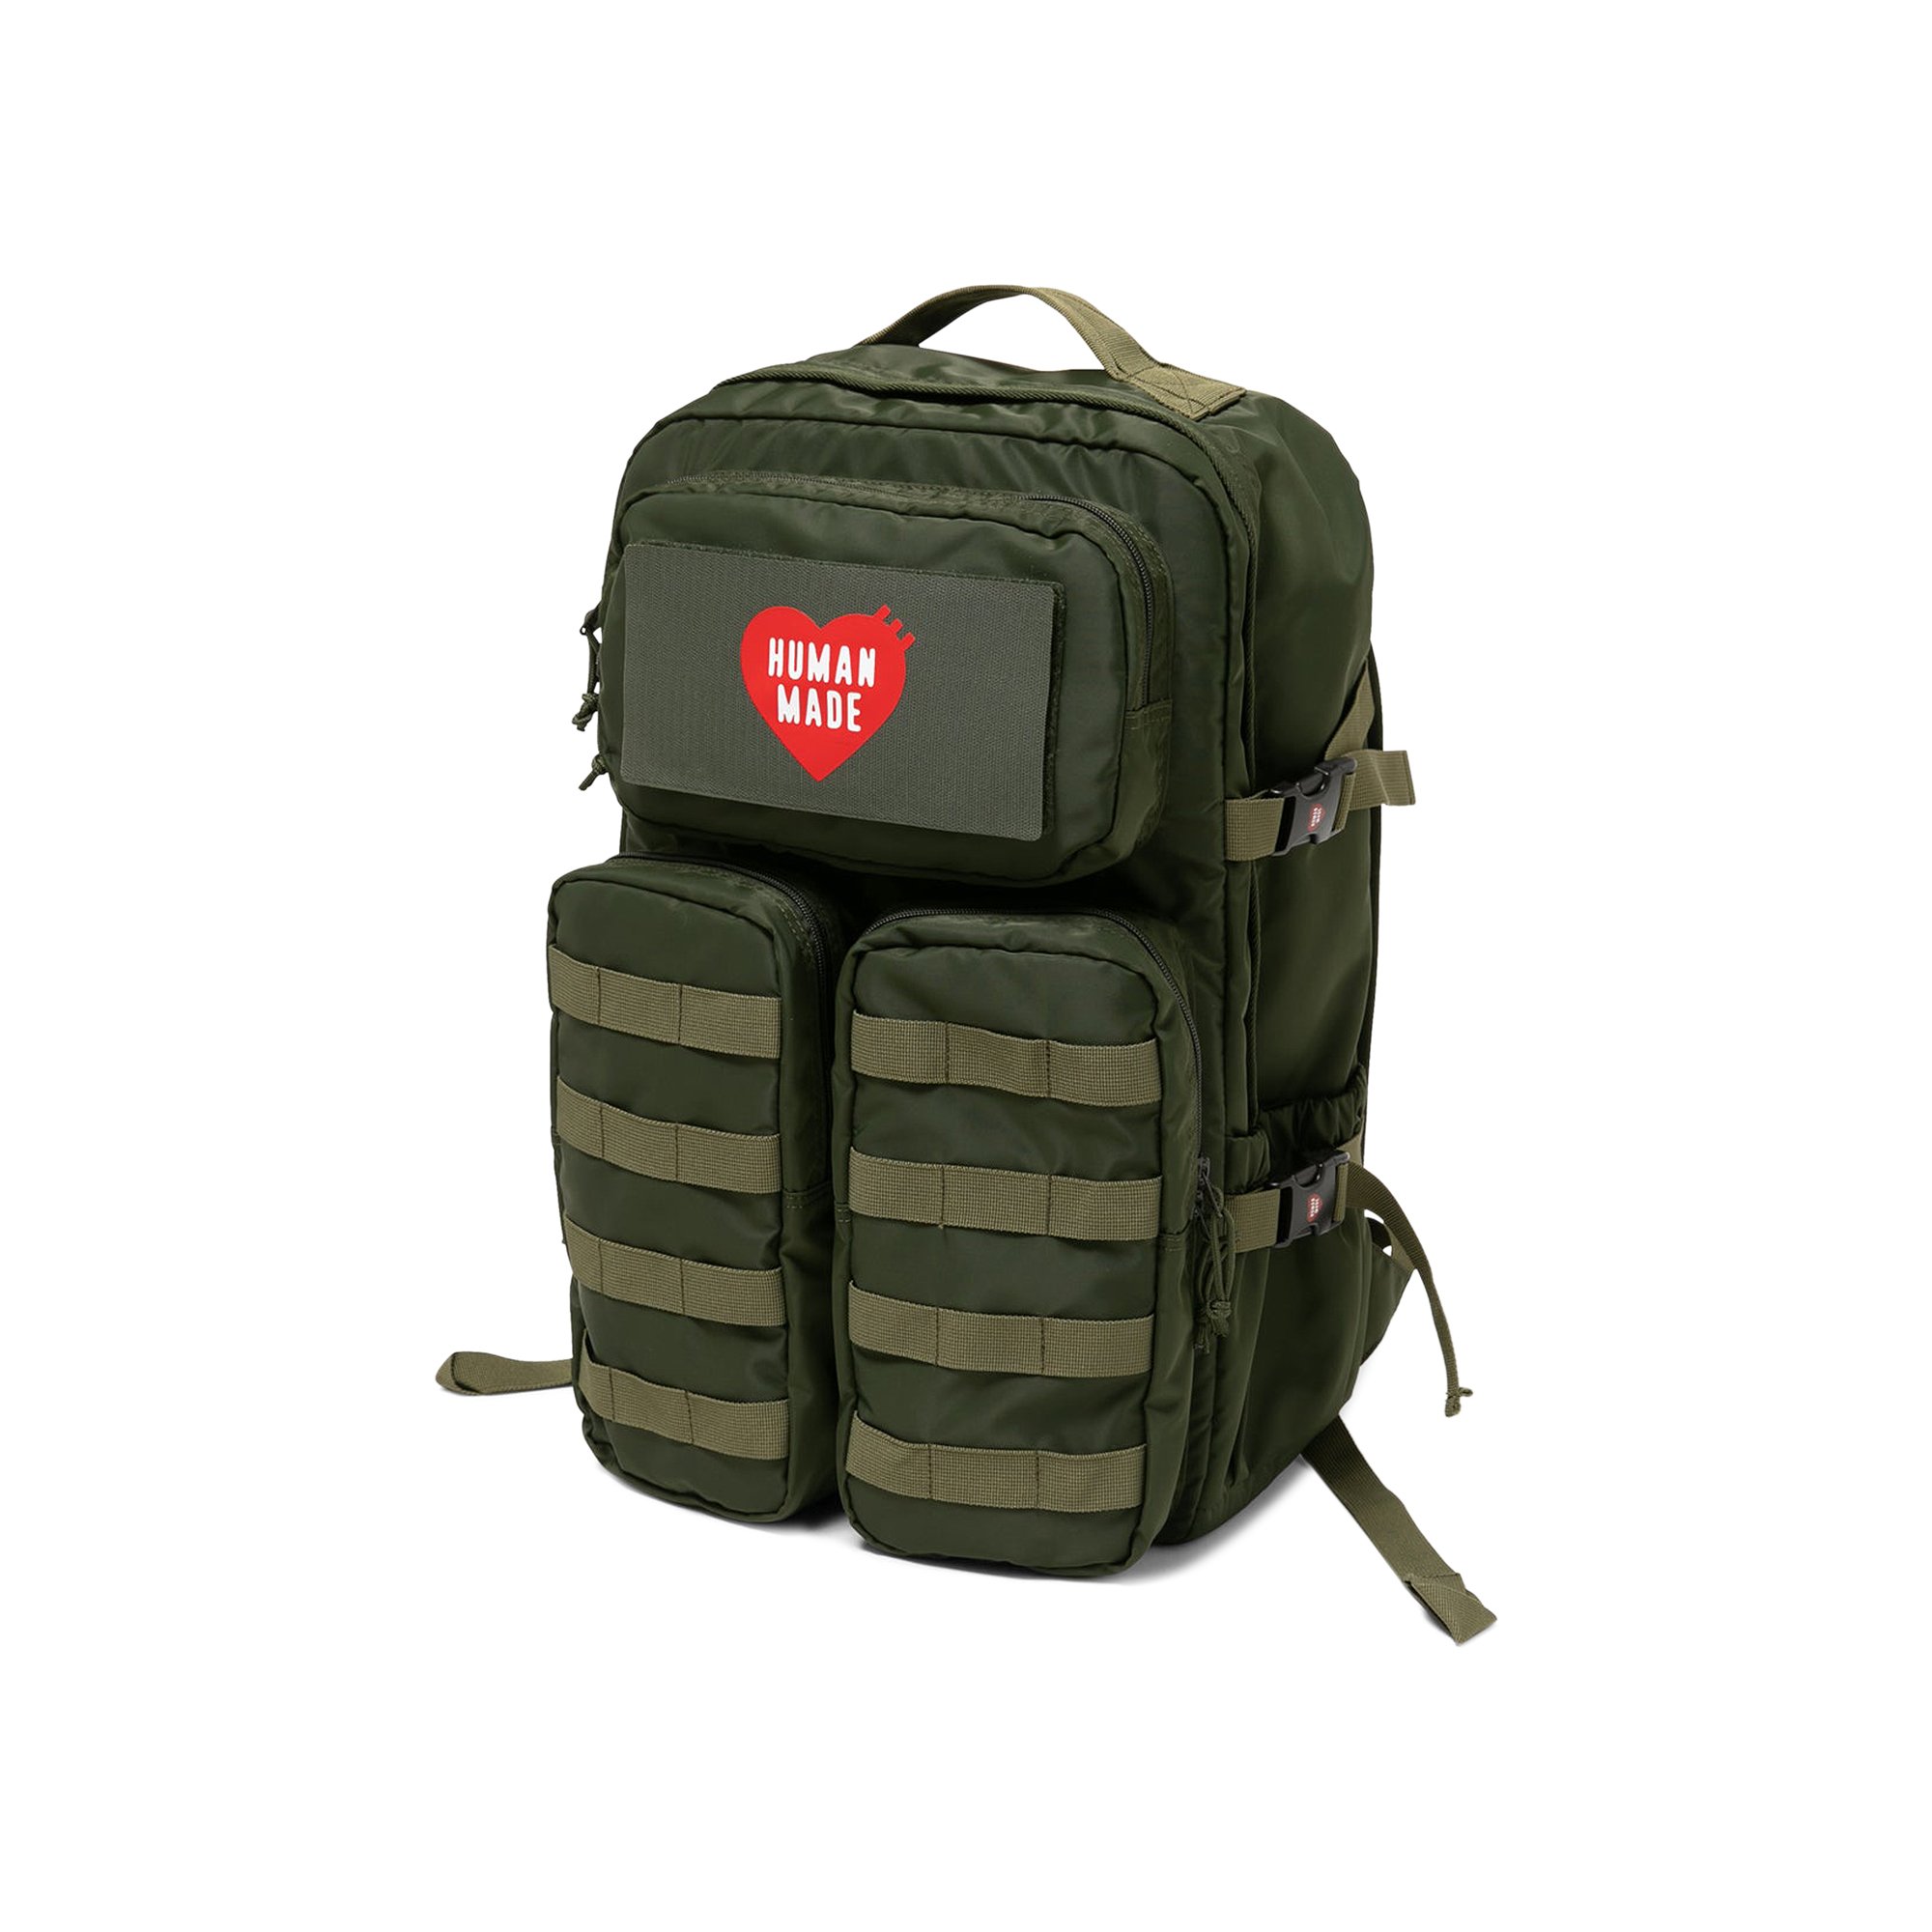 Buy Human Made Military Backpack 'Olive Drab' - HM24GD032 OLIV | GOAT